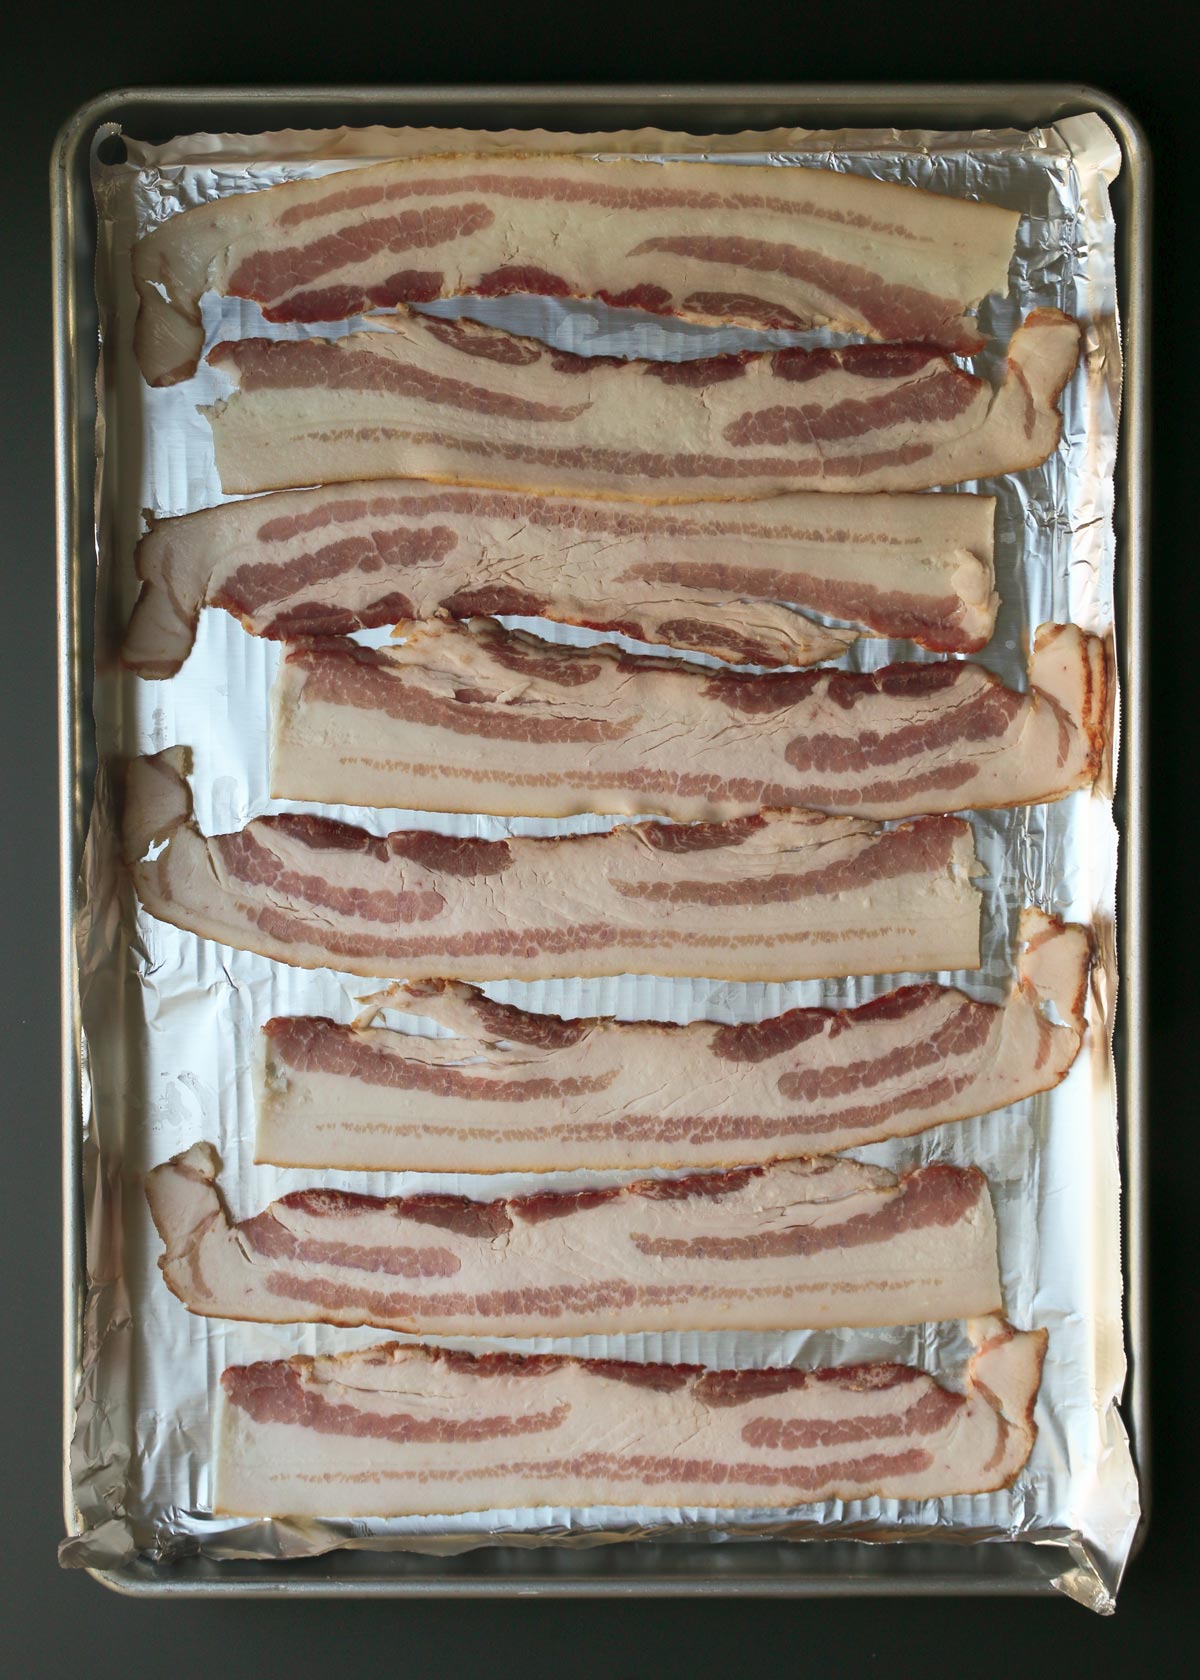 uncooked bacon laid out on rimmed baking sheet.